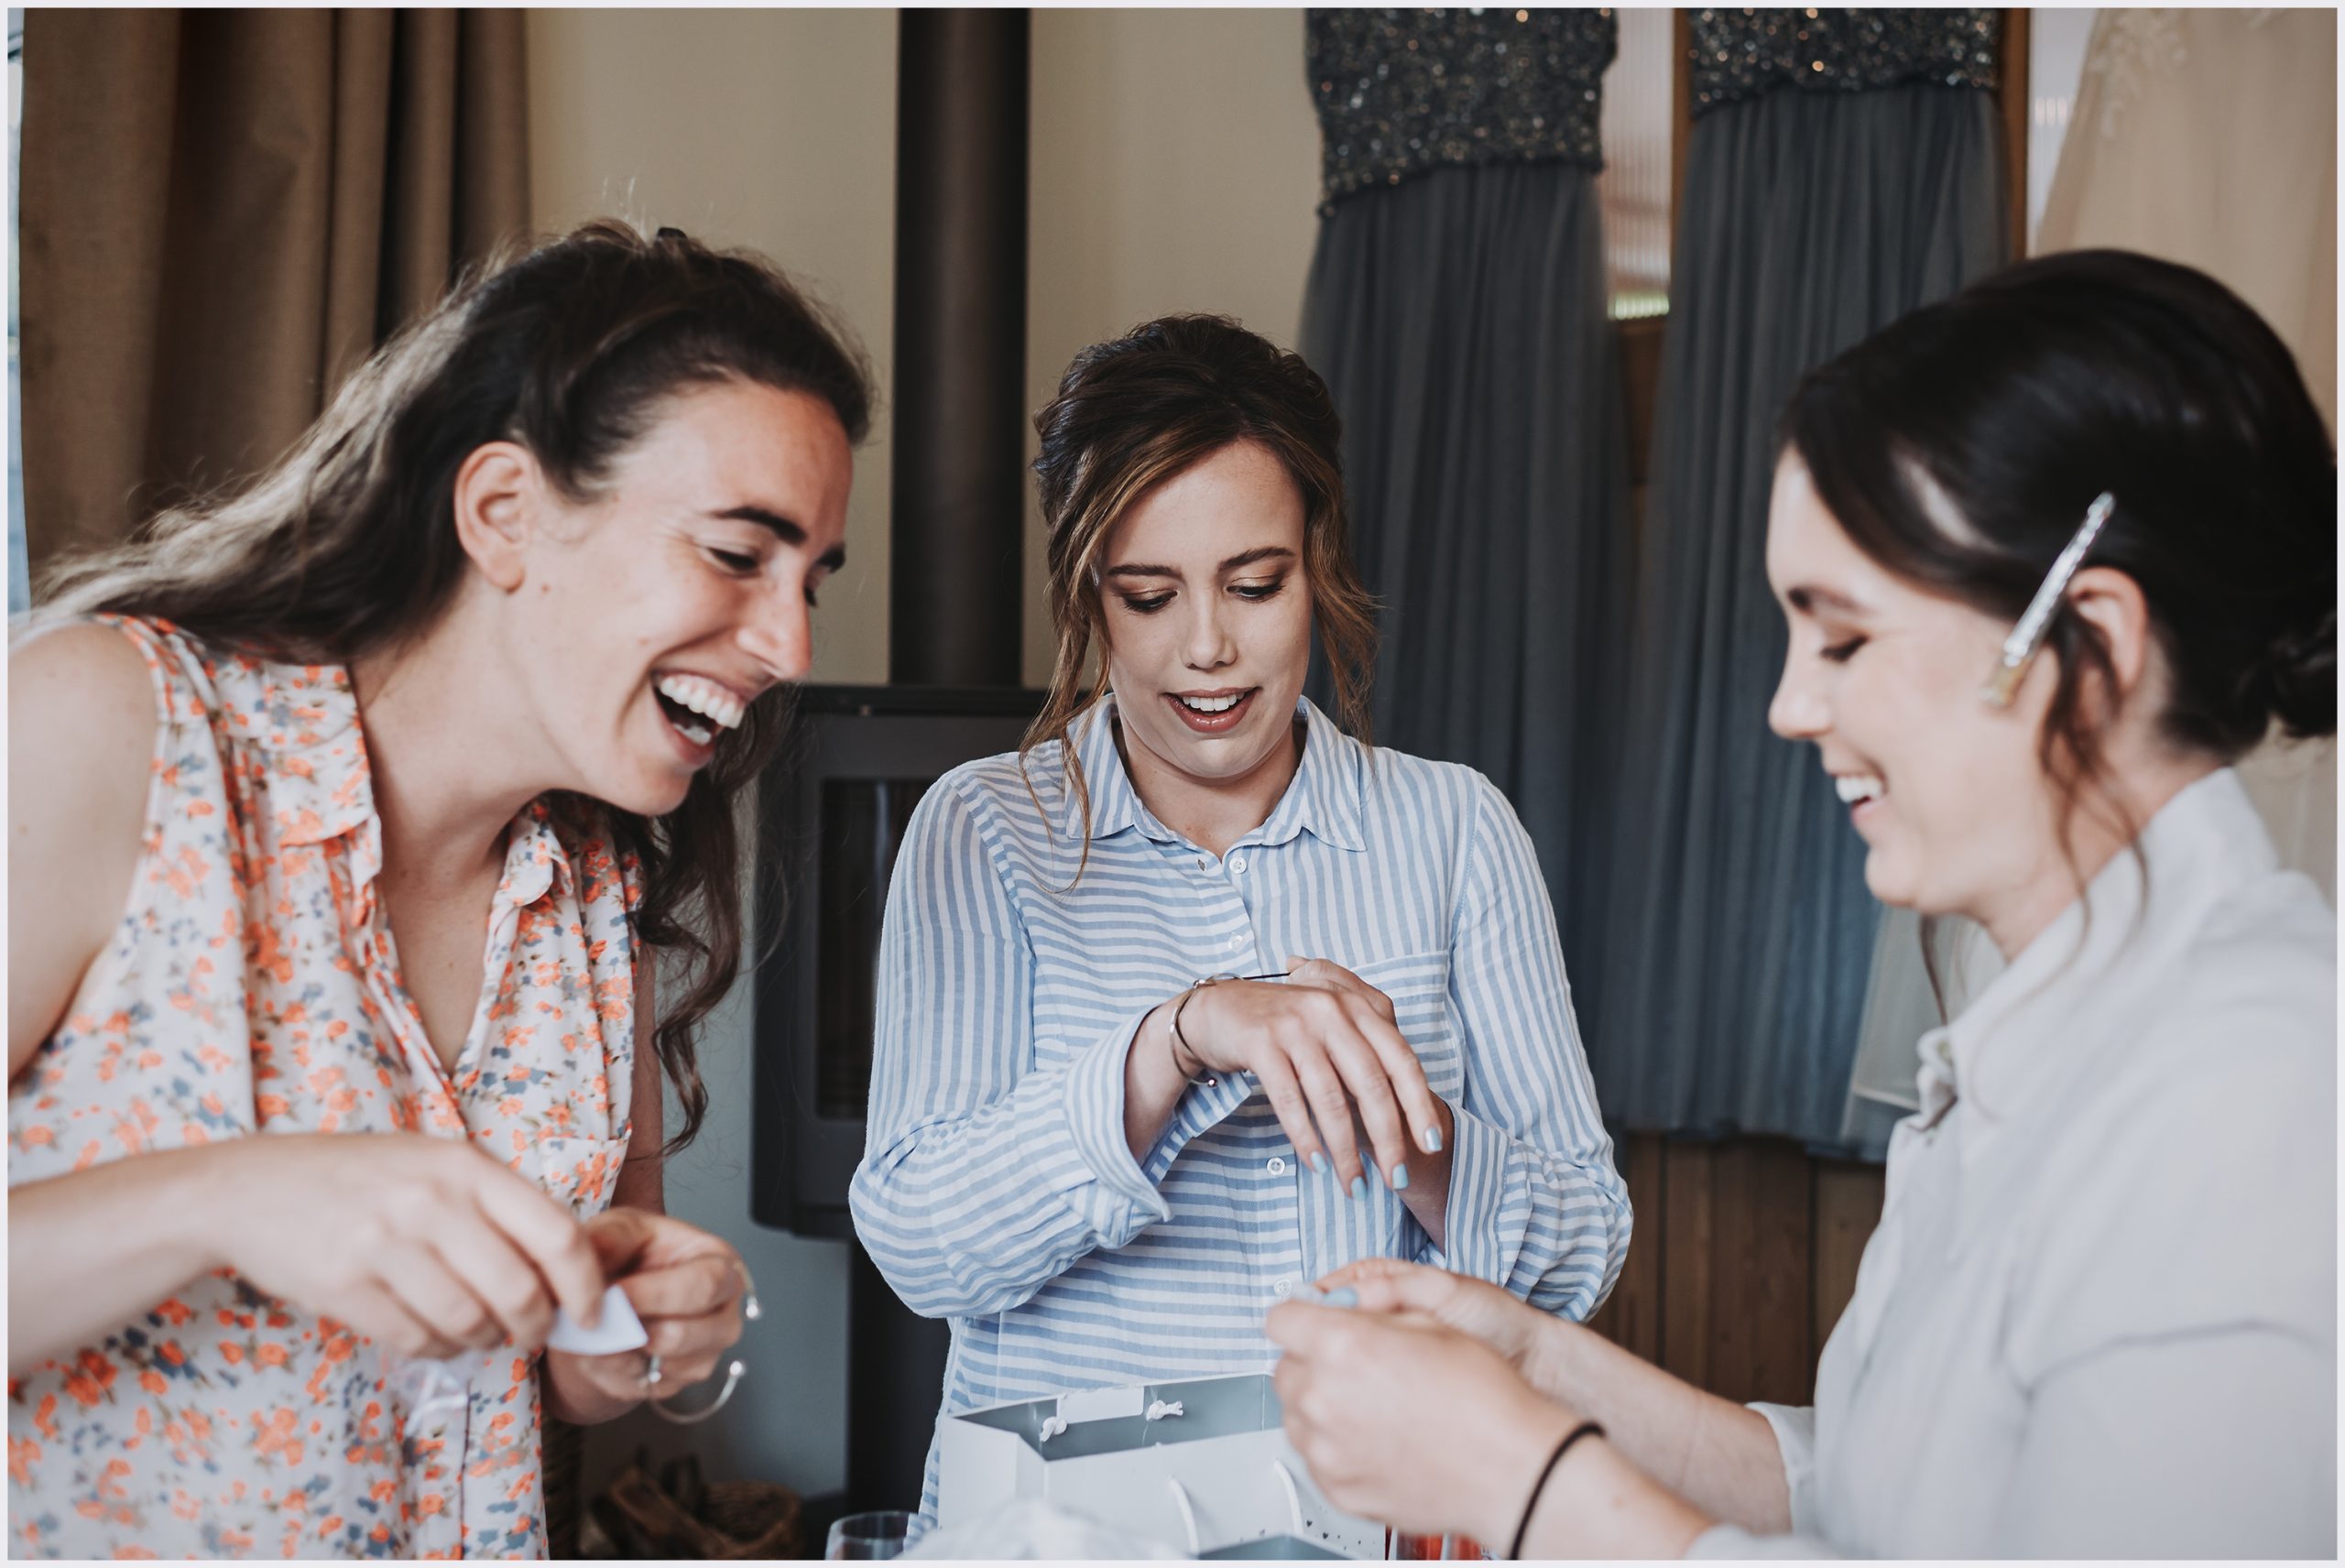 A Group of bridesmaids excitedly open gifts from the bride on the morning of her wedding.  Image captured by North Wales wedding photographer Helena Jayne Photography